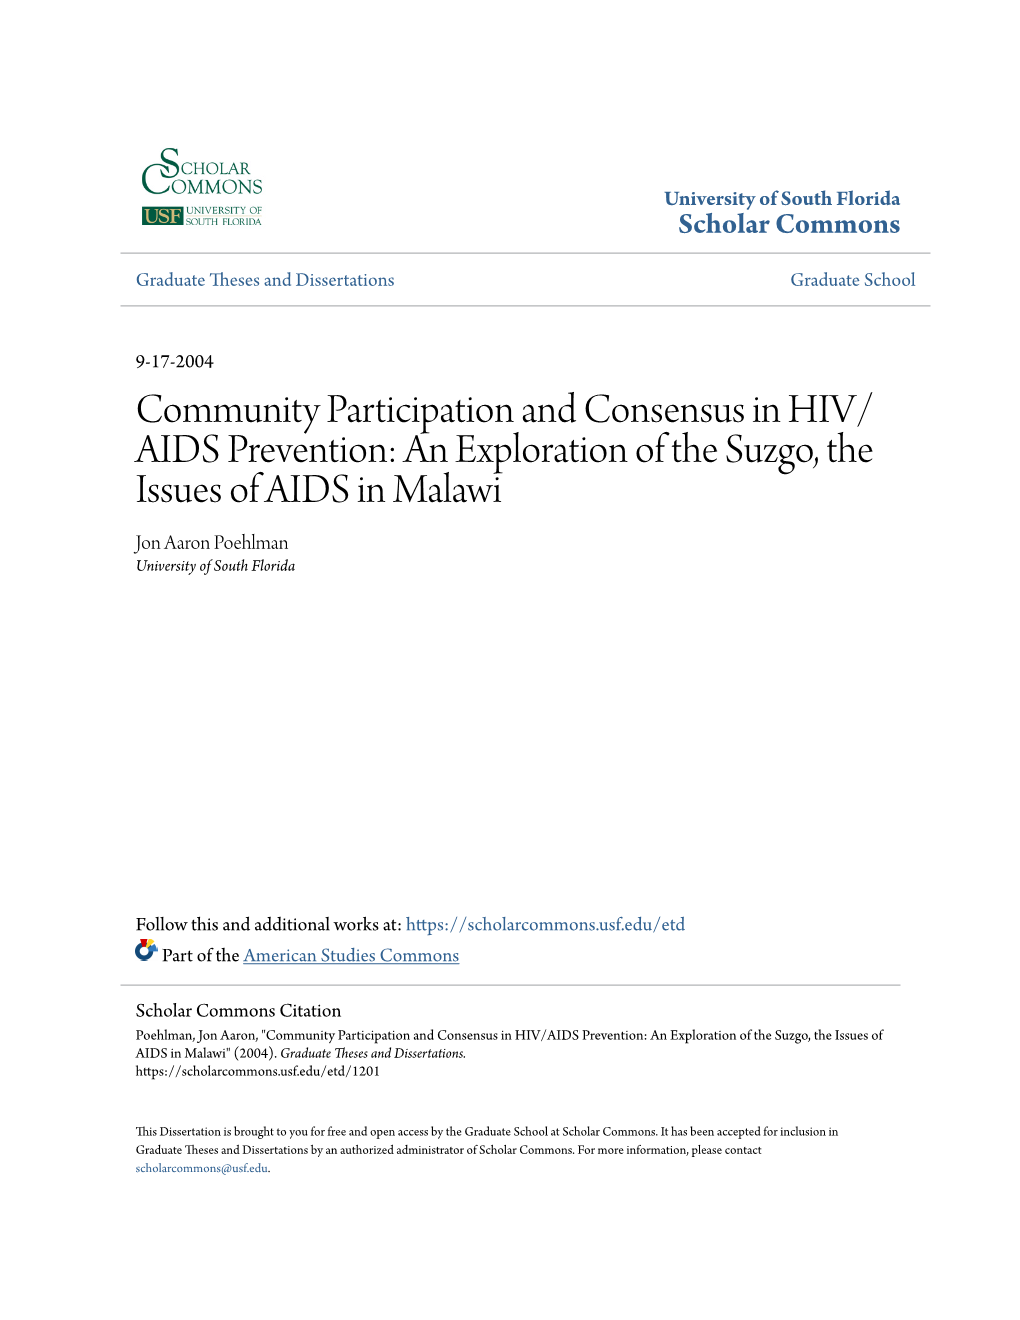 Community Participation and Consensus in HIV/AIDS Prevention: an Exploration of the Suzgo, the Issues of AIDS in Malawi" (2004)